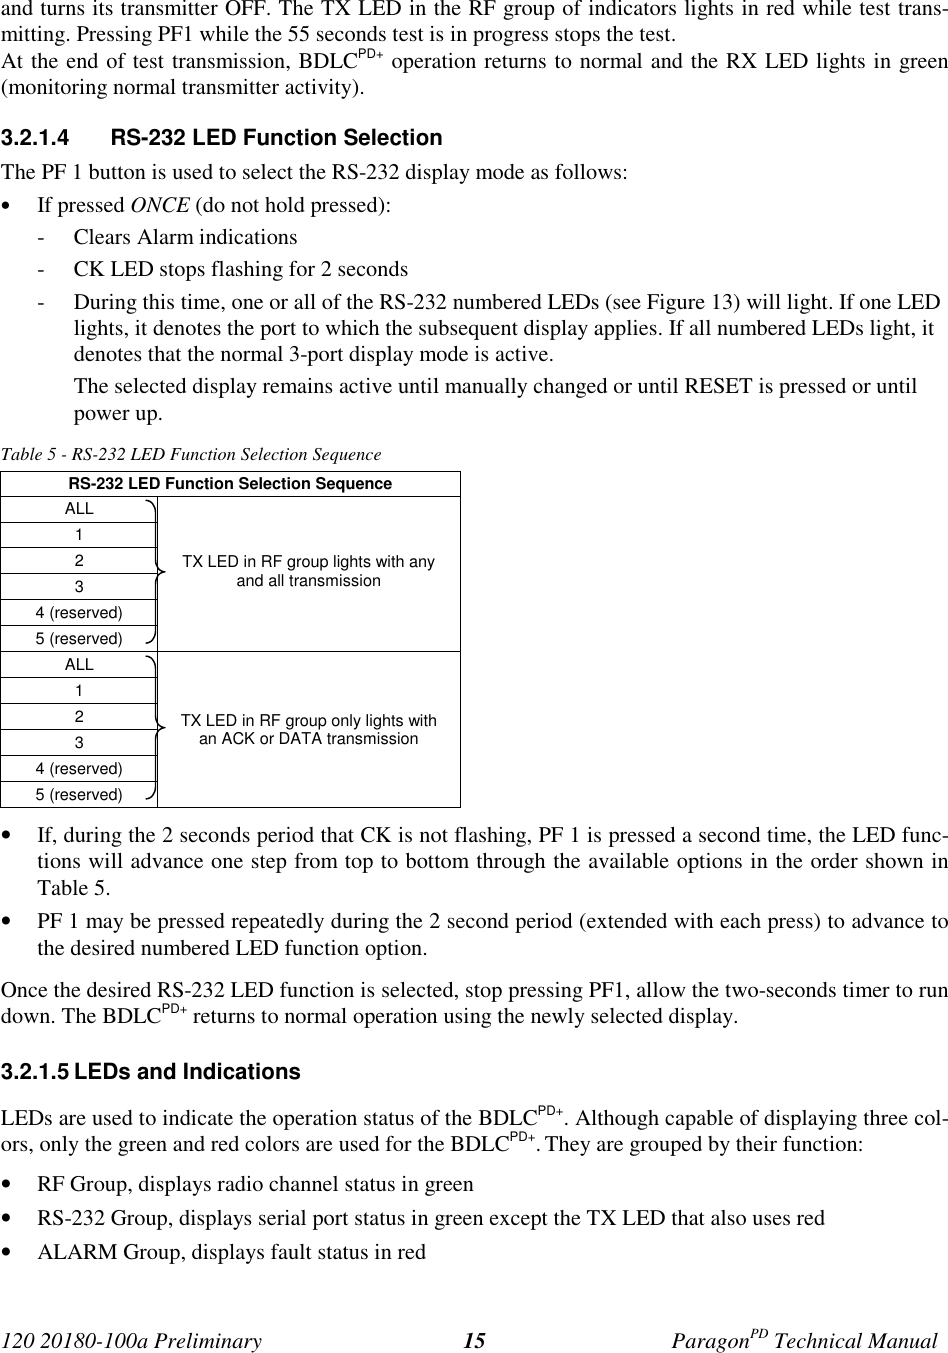 Page 22 of CalAmp Wireless Networks BDD4T85-1 Paragon/PD User Manual Parg PD  T100a Prelim